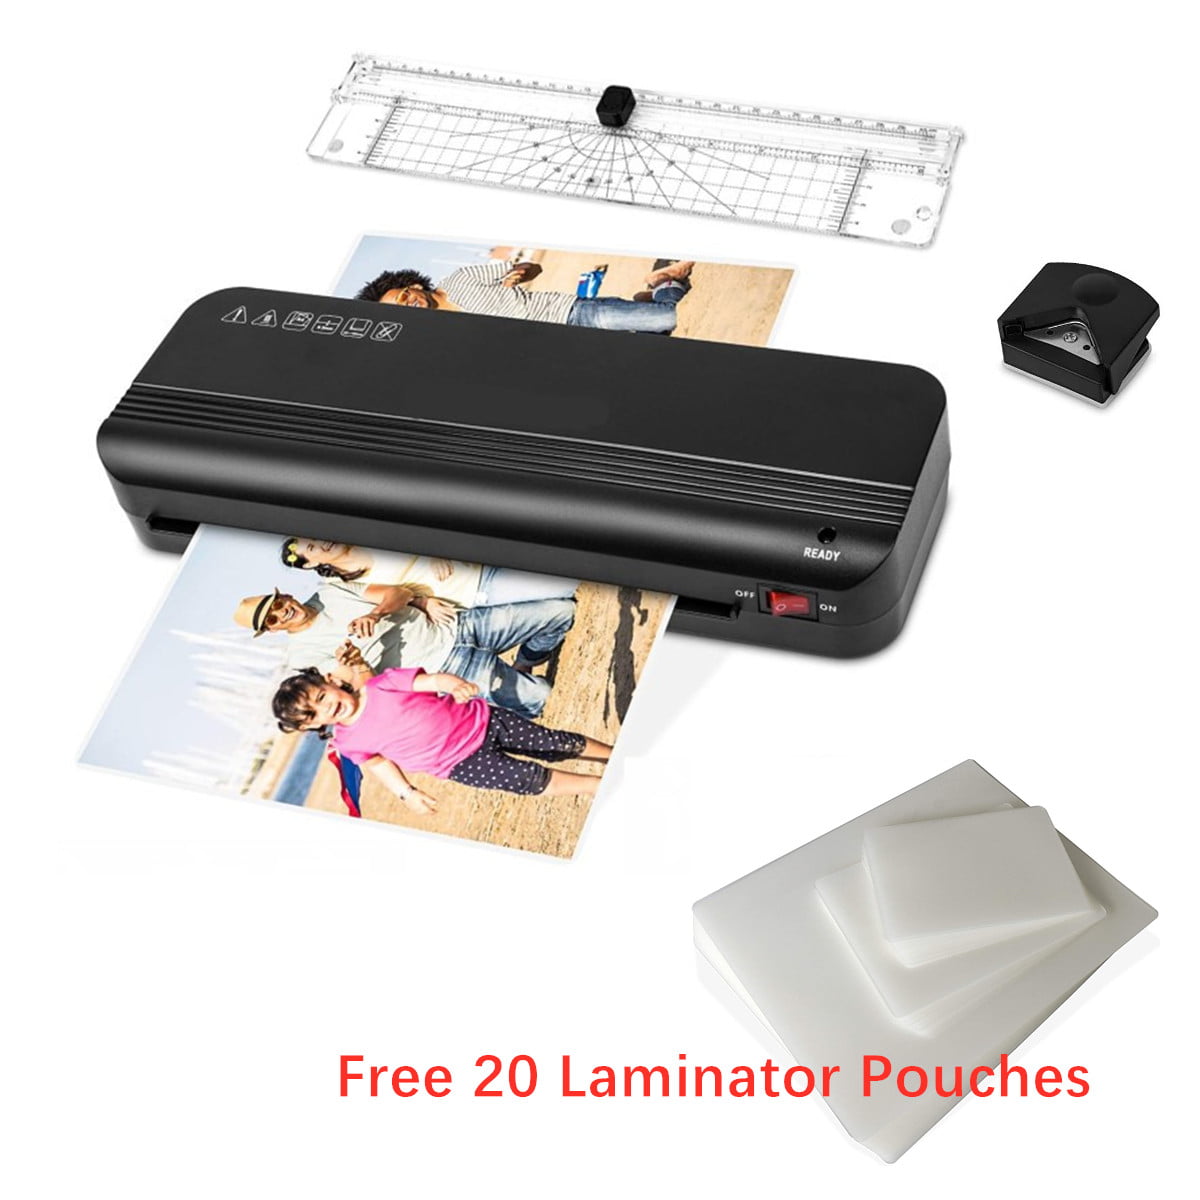 Details about   4 in 1 GerTong 9" A4 Thermal Laminator 20 Laminating Pouches Paper Trimmer USA 